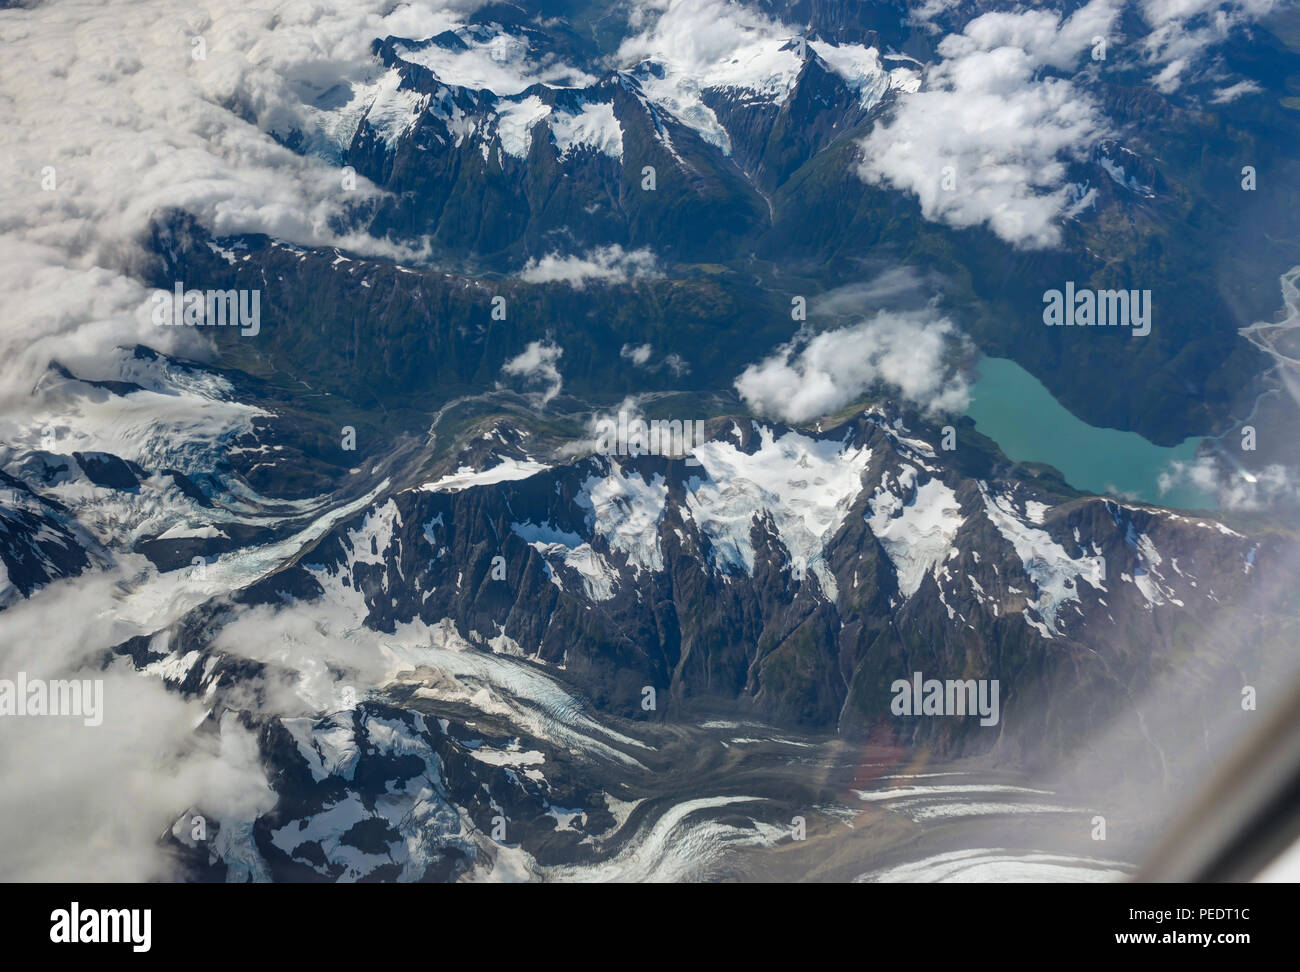 Aerial glacier view on the flight from Anchorage to Seattle. Photo taken in United States of America. Stock Photo